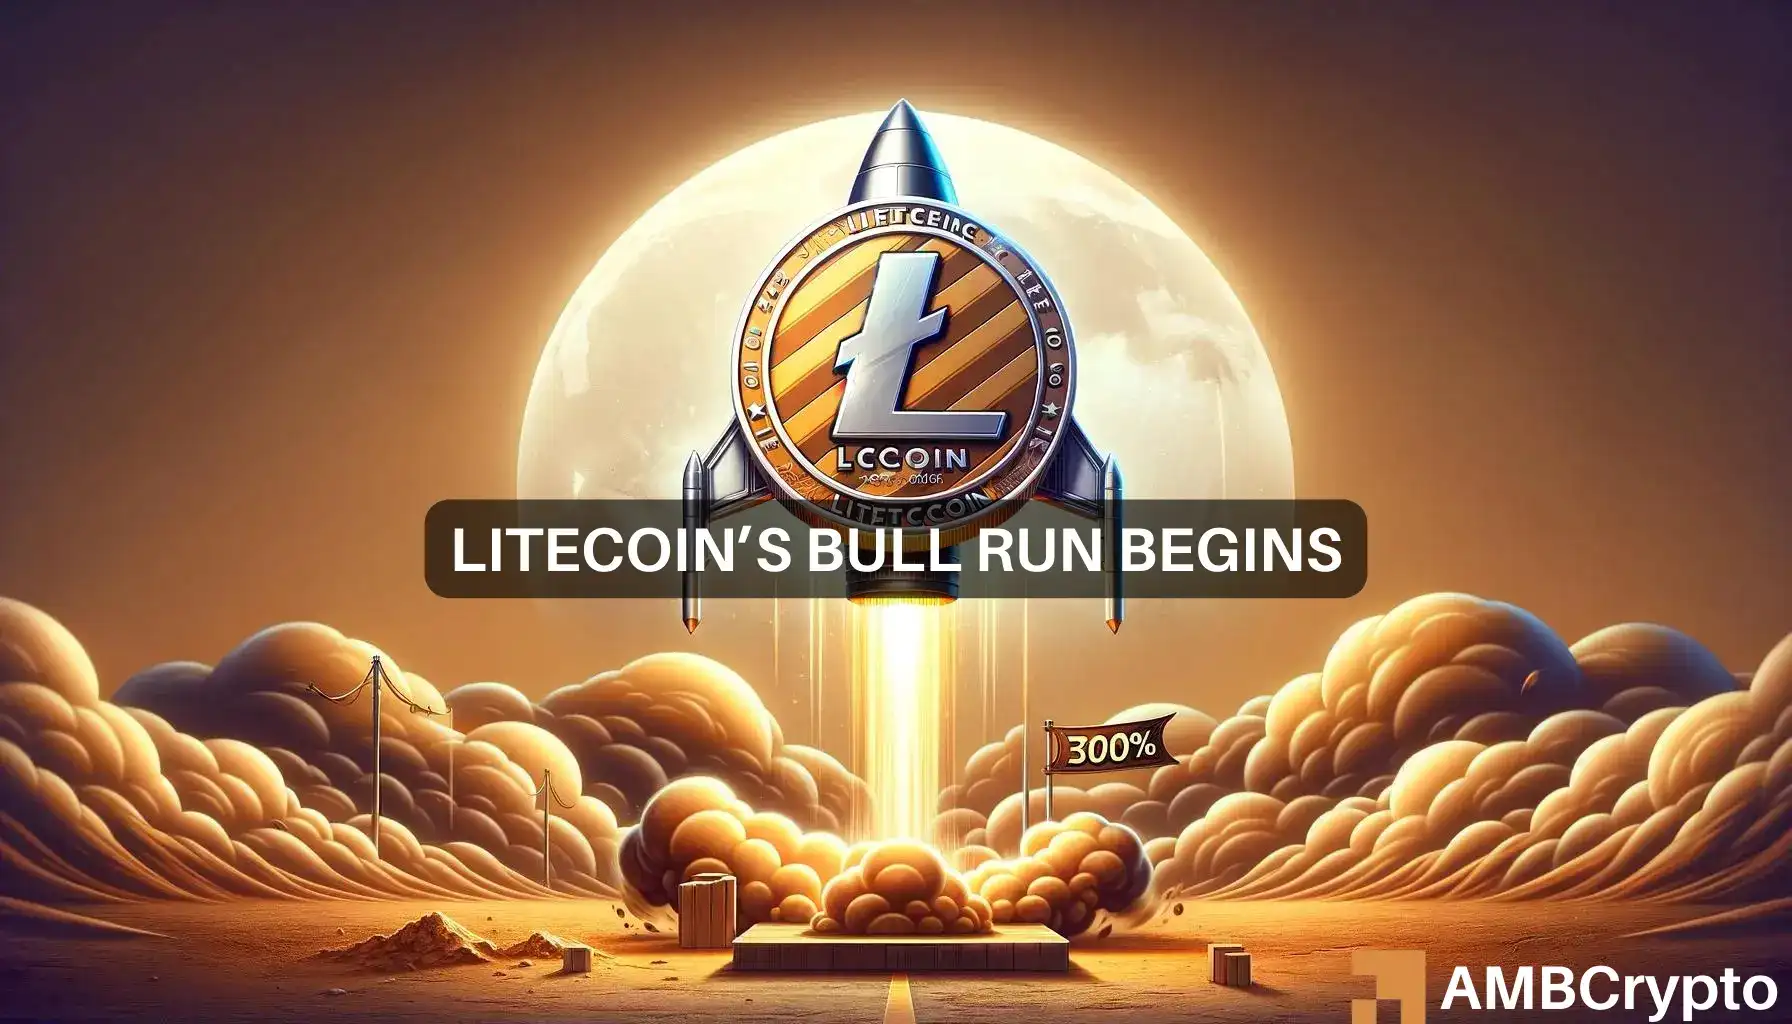 Will the Bitcoin halving help Litecoin rally 300% this summer?